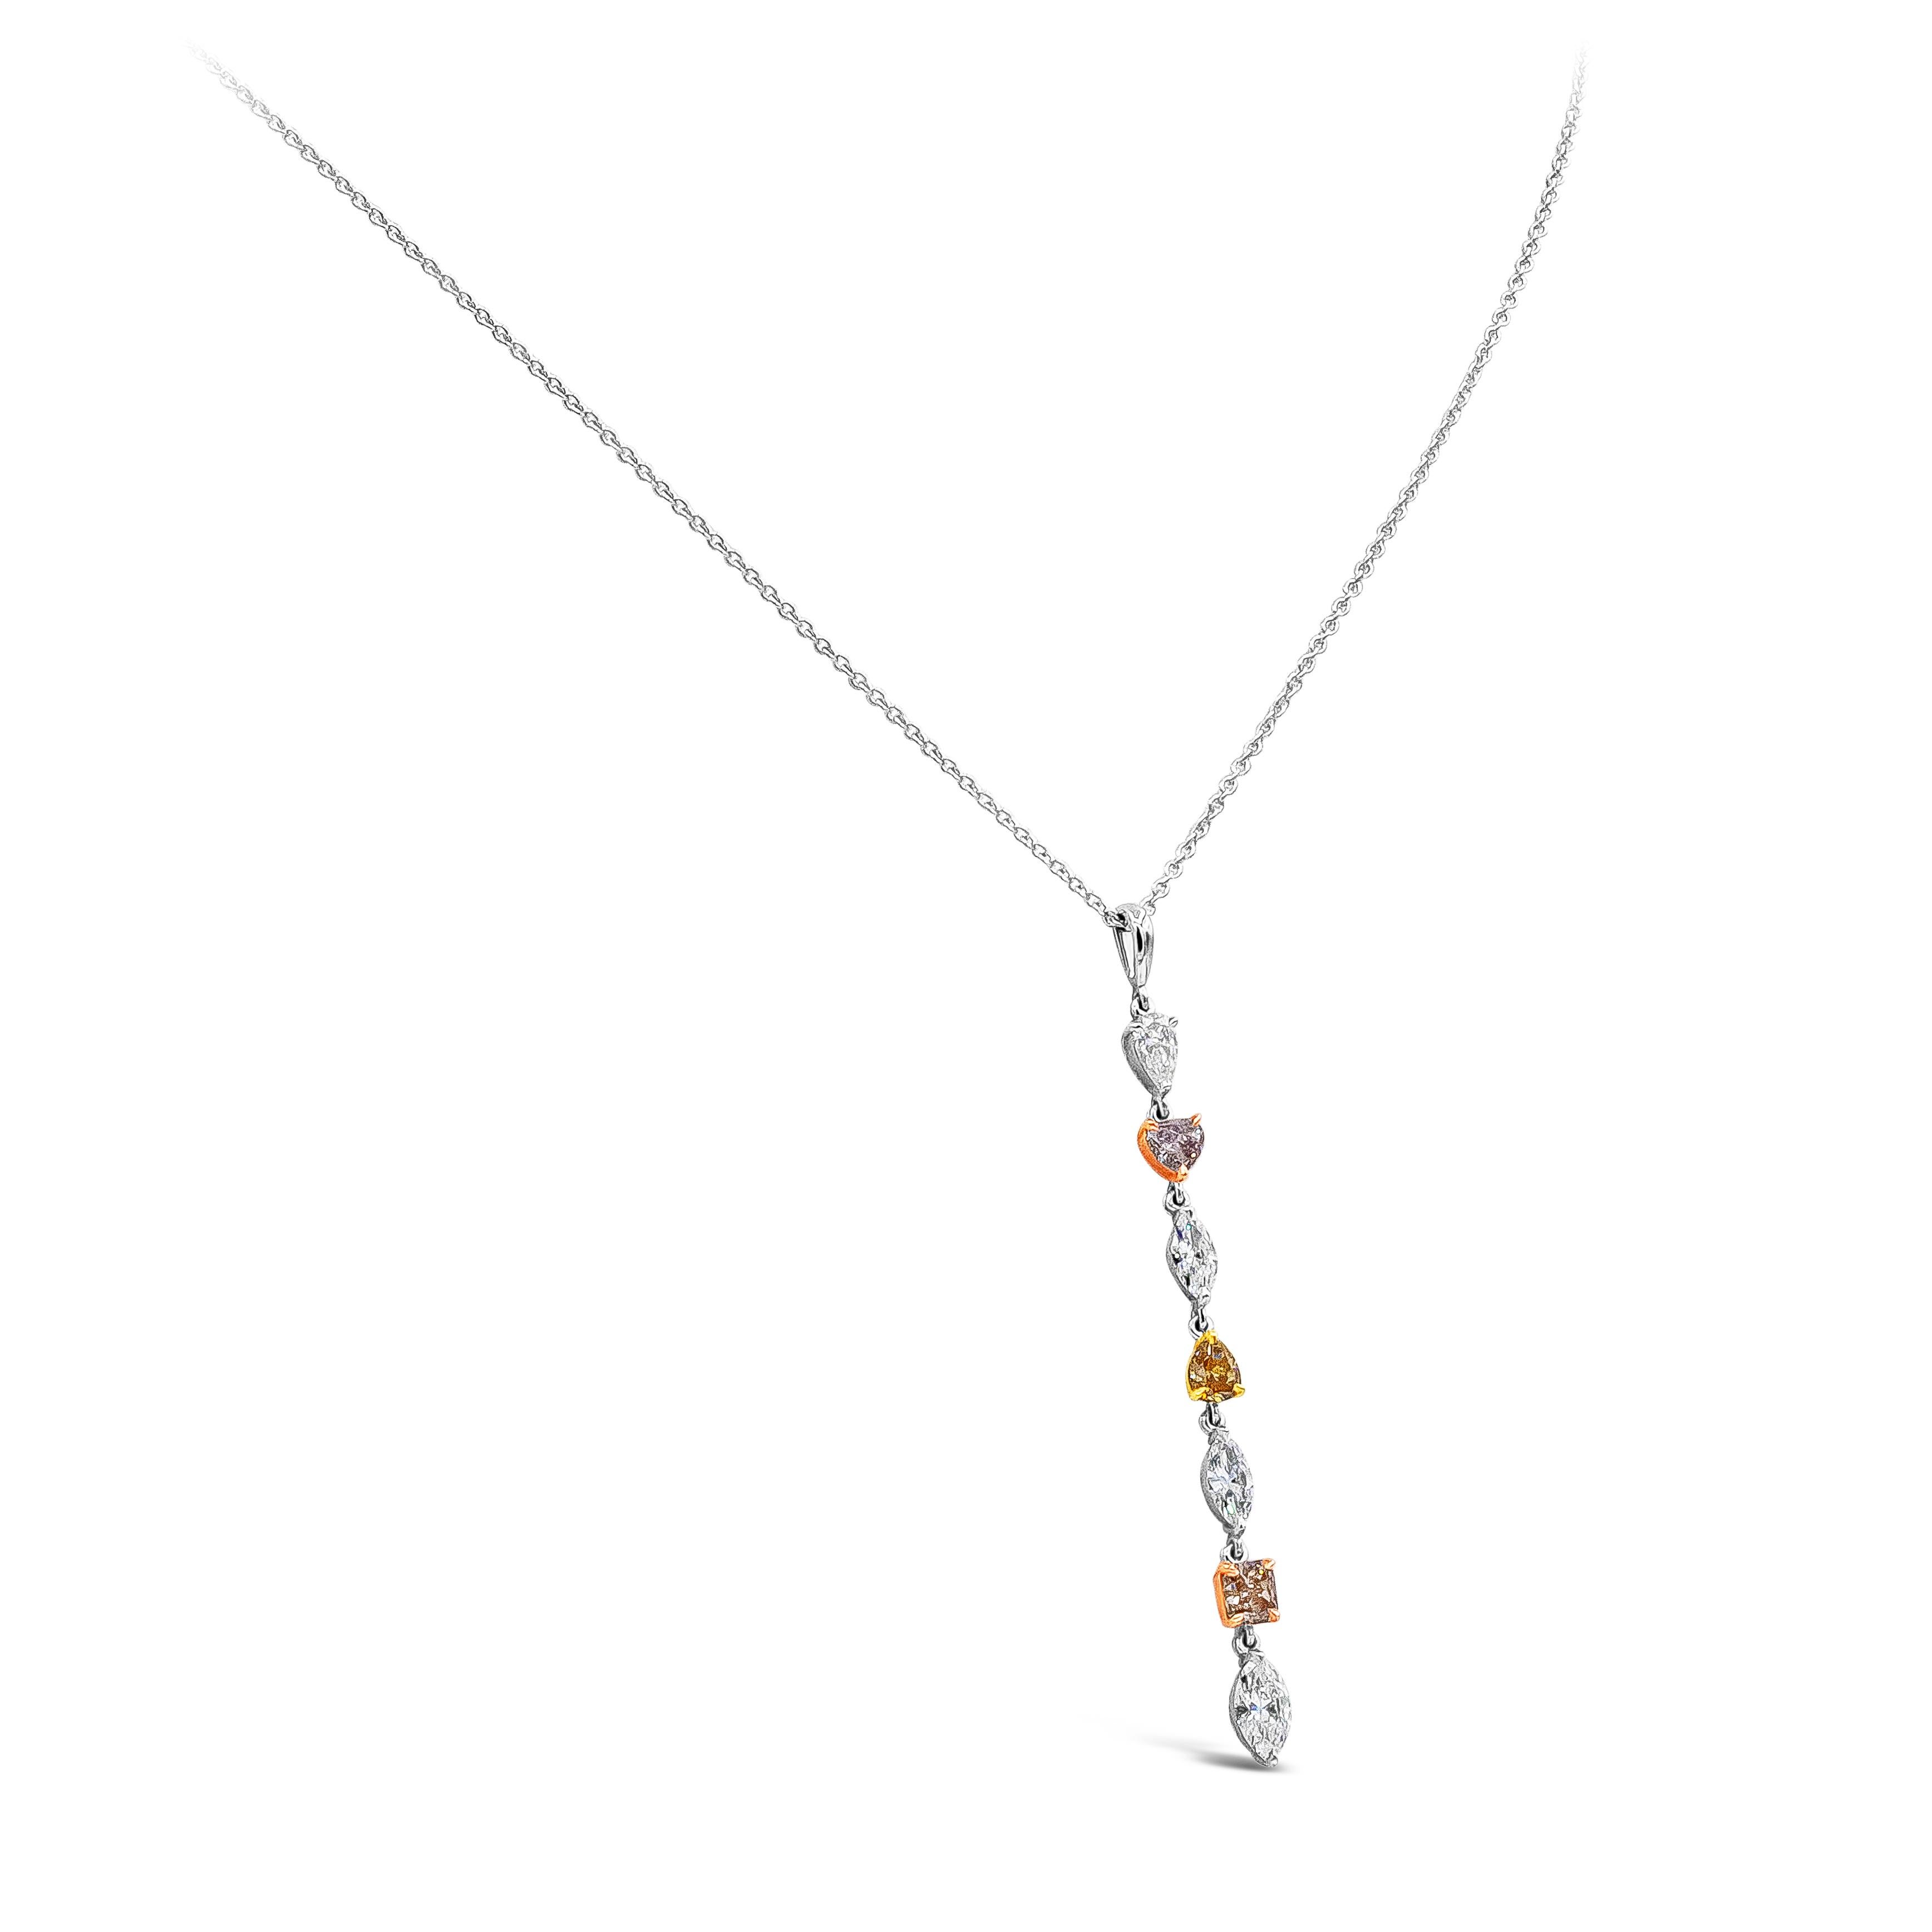 This is an incredibly gorgeous and colorful drop pendant necklace showcasing GIA certified fancy shaped diamonds set in an elegant drop design weighing 0.96 carats total. Spaced by marquise and pear shape white diamonds weighing 1.04 carats total, F